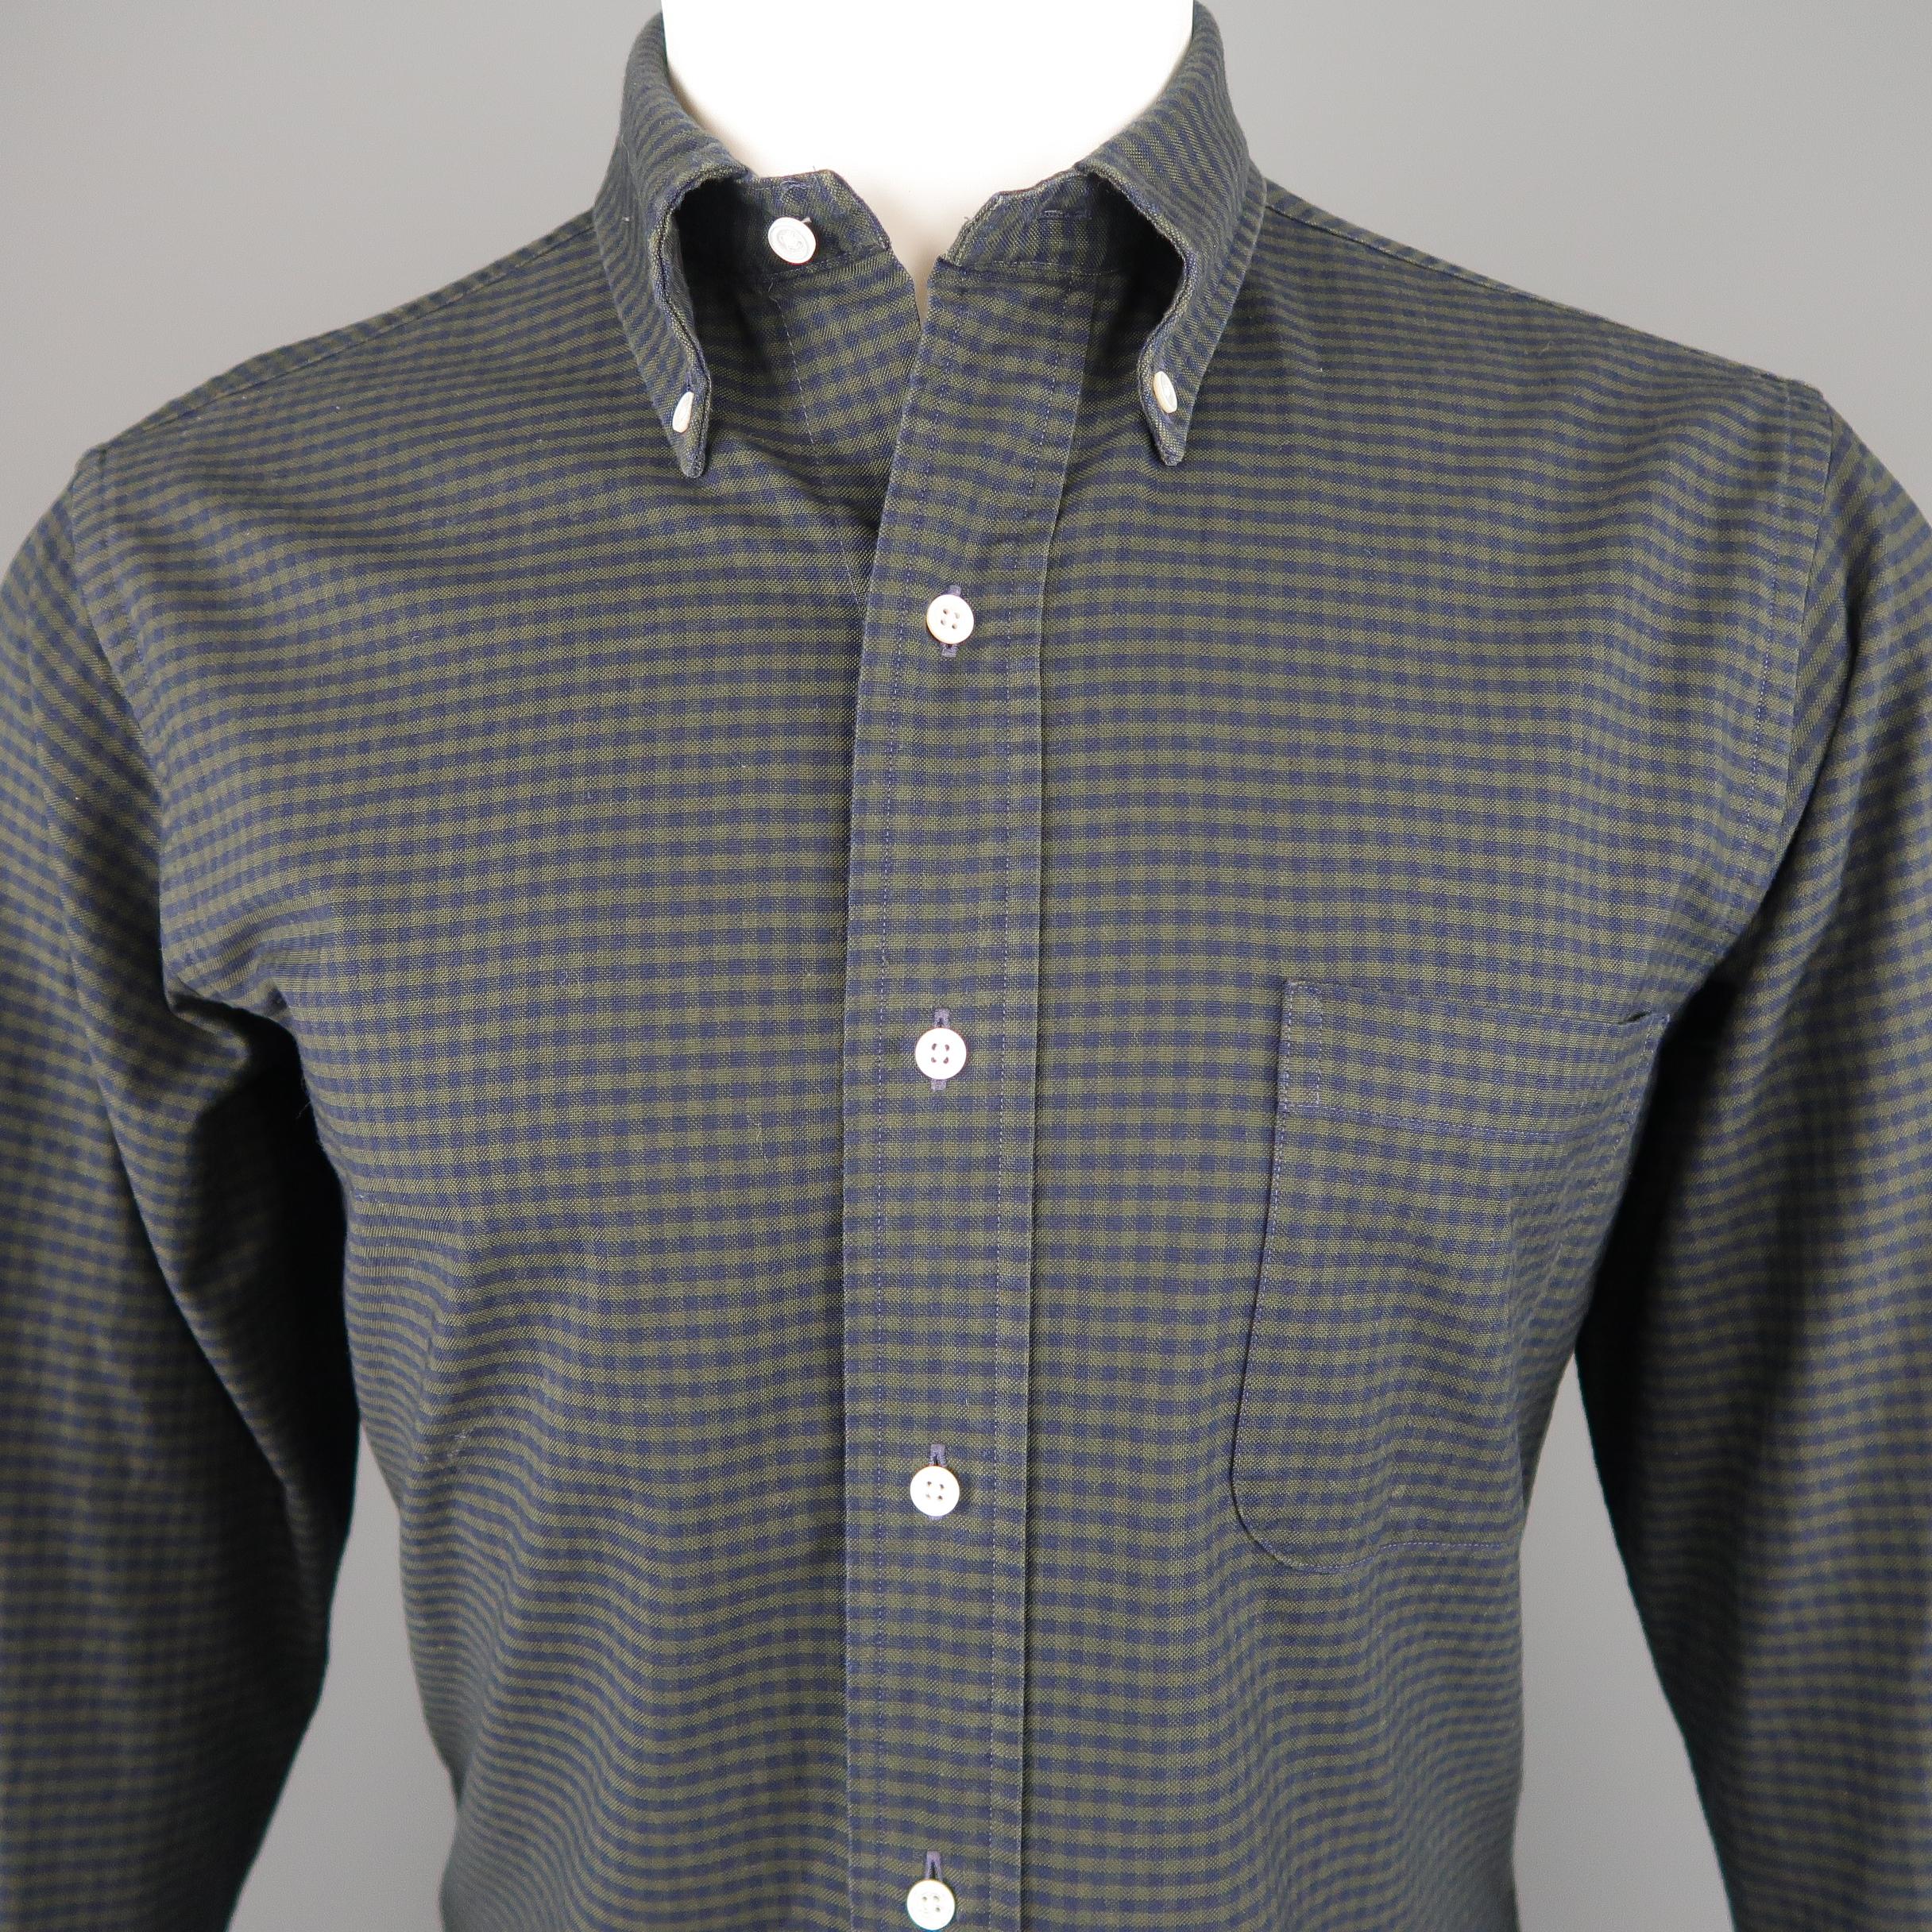 BLACK FLEECE shirt comes in forest green with navy gingham plaid pattern throughout, button down collar, curved hem, and patch pocket. Made in USA. Retail price $225,00. 
 
Excellent Pre-Owned Condition.
Marked: BB1
 
Measurements:
 
Shoulder: 17